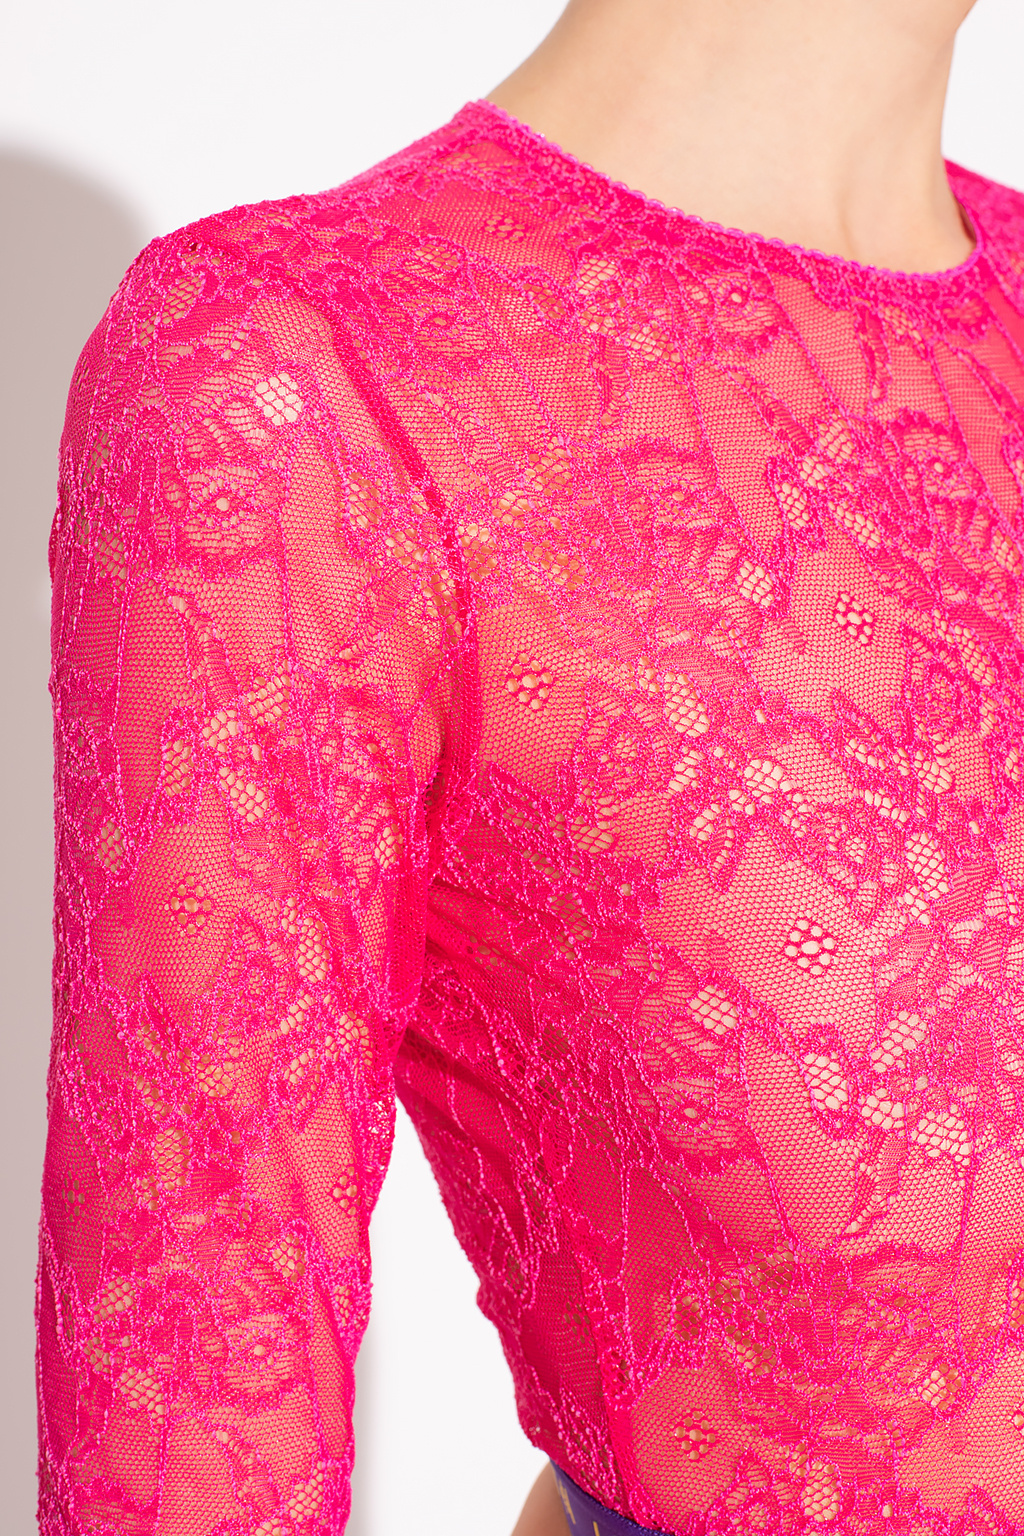 Dsquared2 Lace top